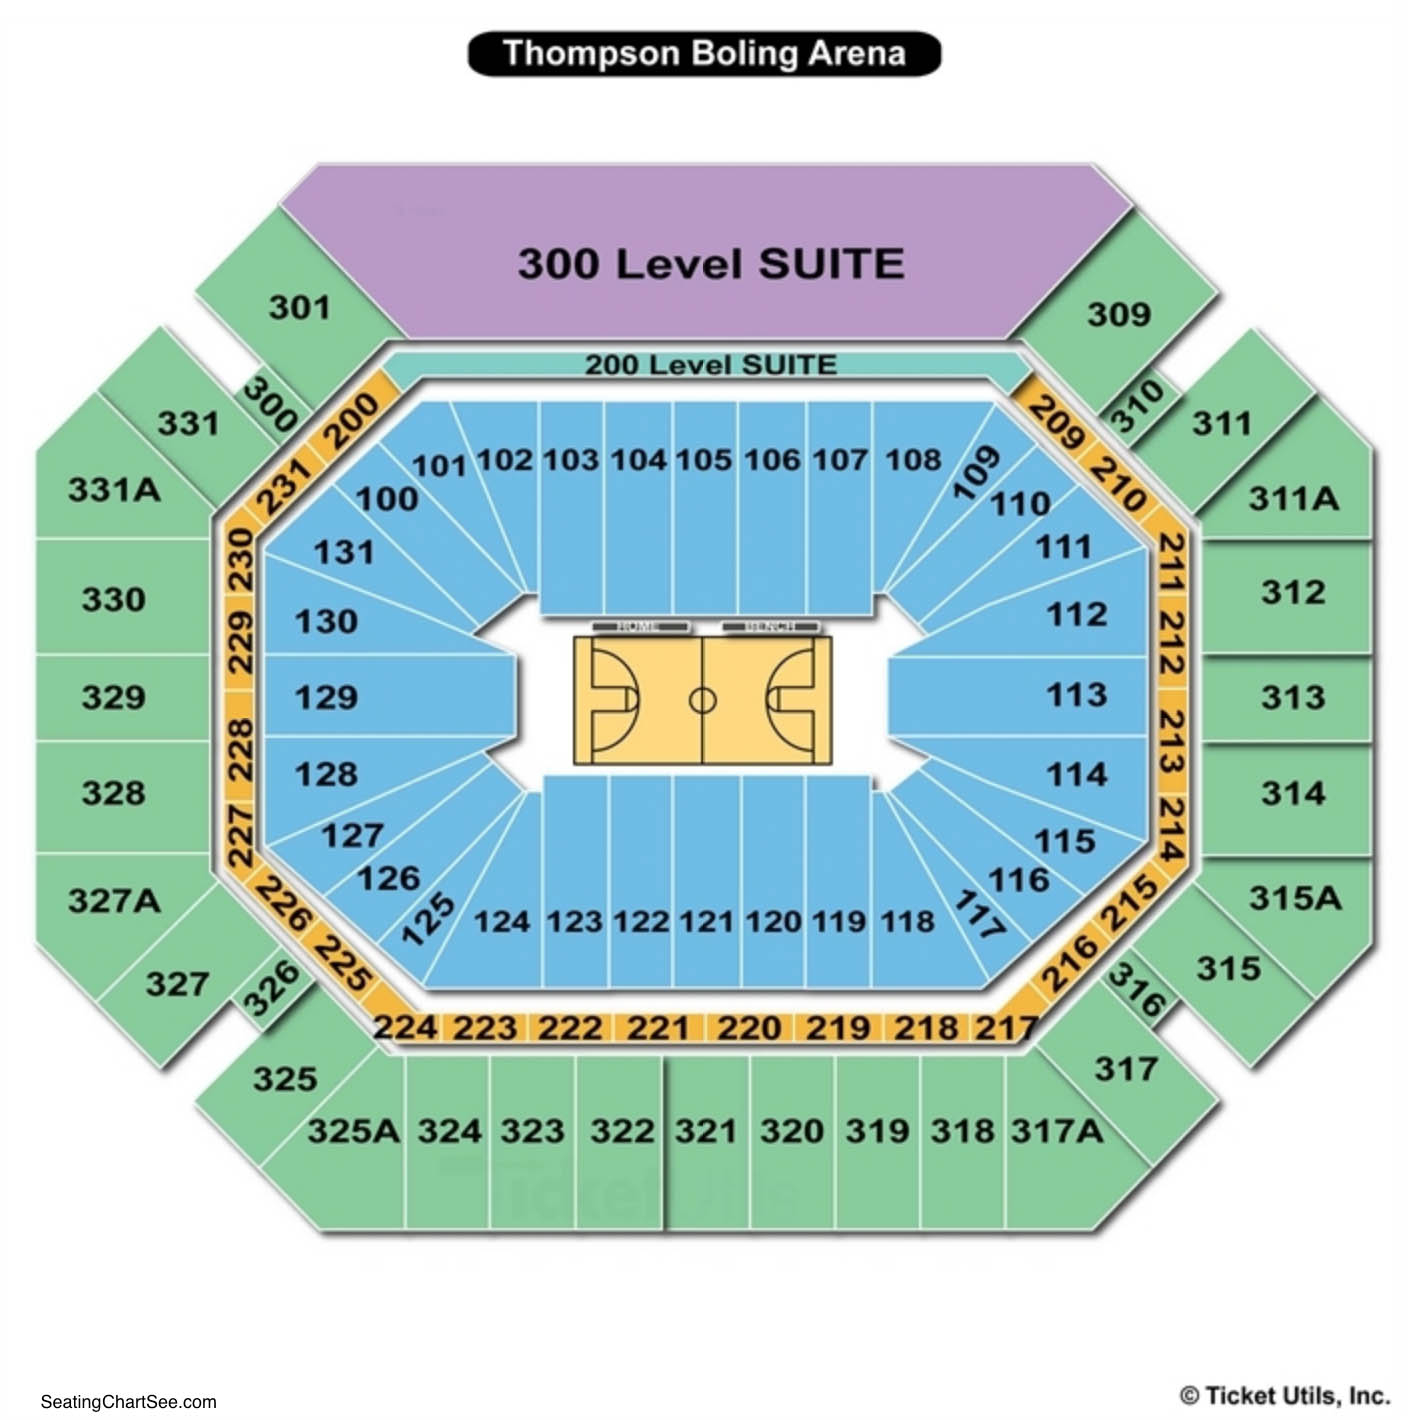 Thompson Boling Arena Seating Charts Views Games Answers Cheats